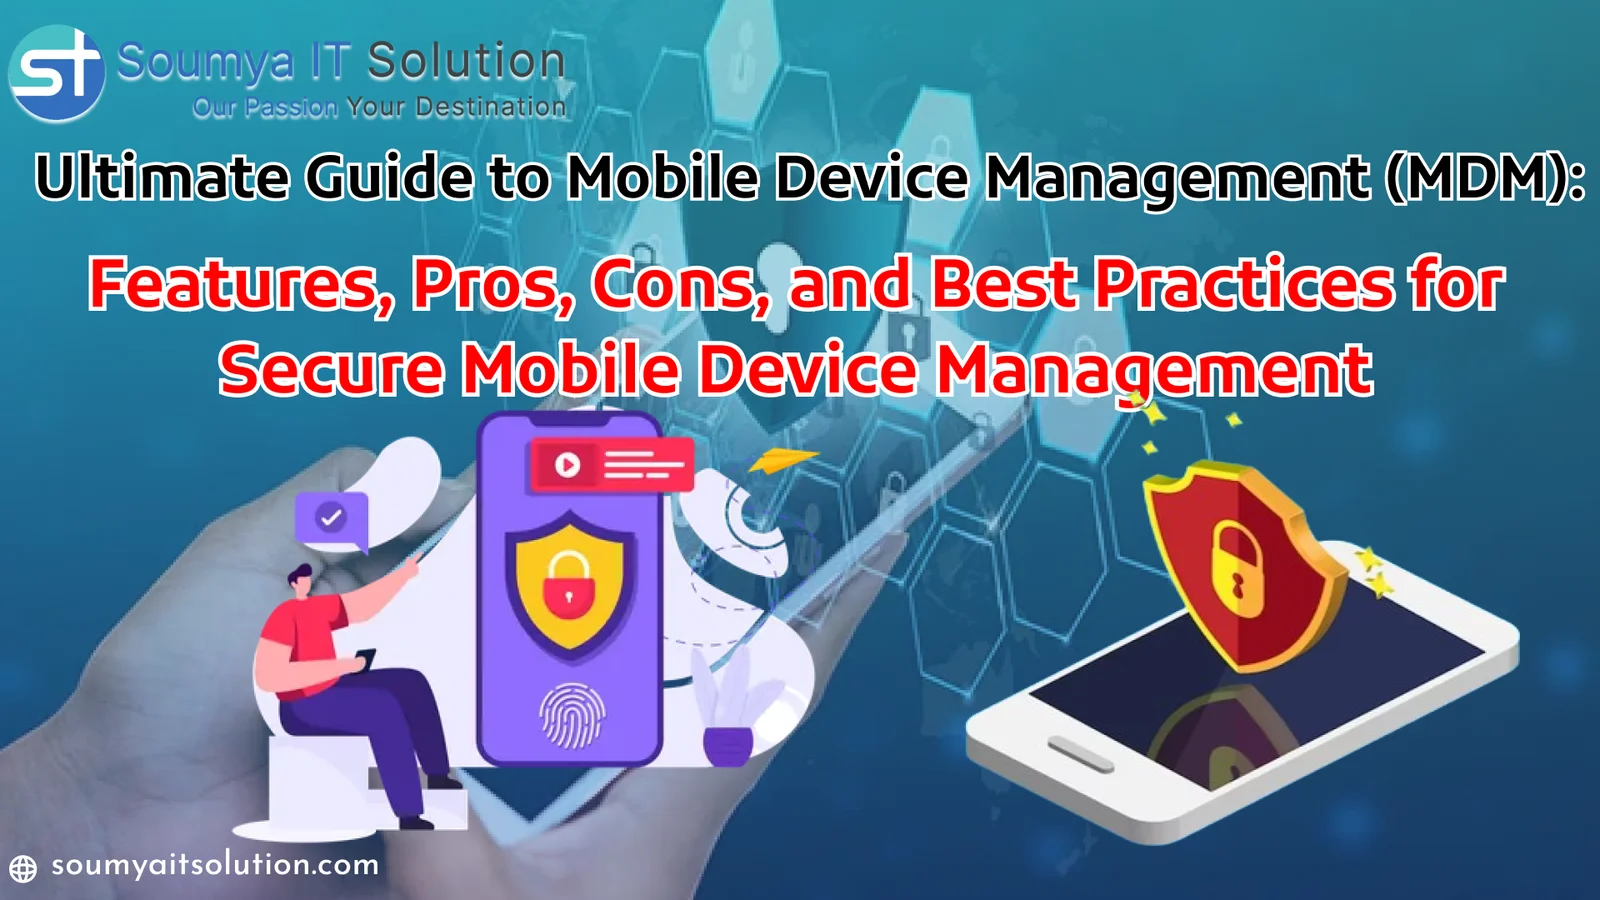 Ultimate Guide to Mobile Device Management (MDM)